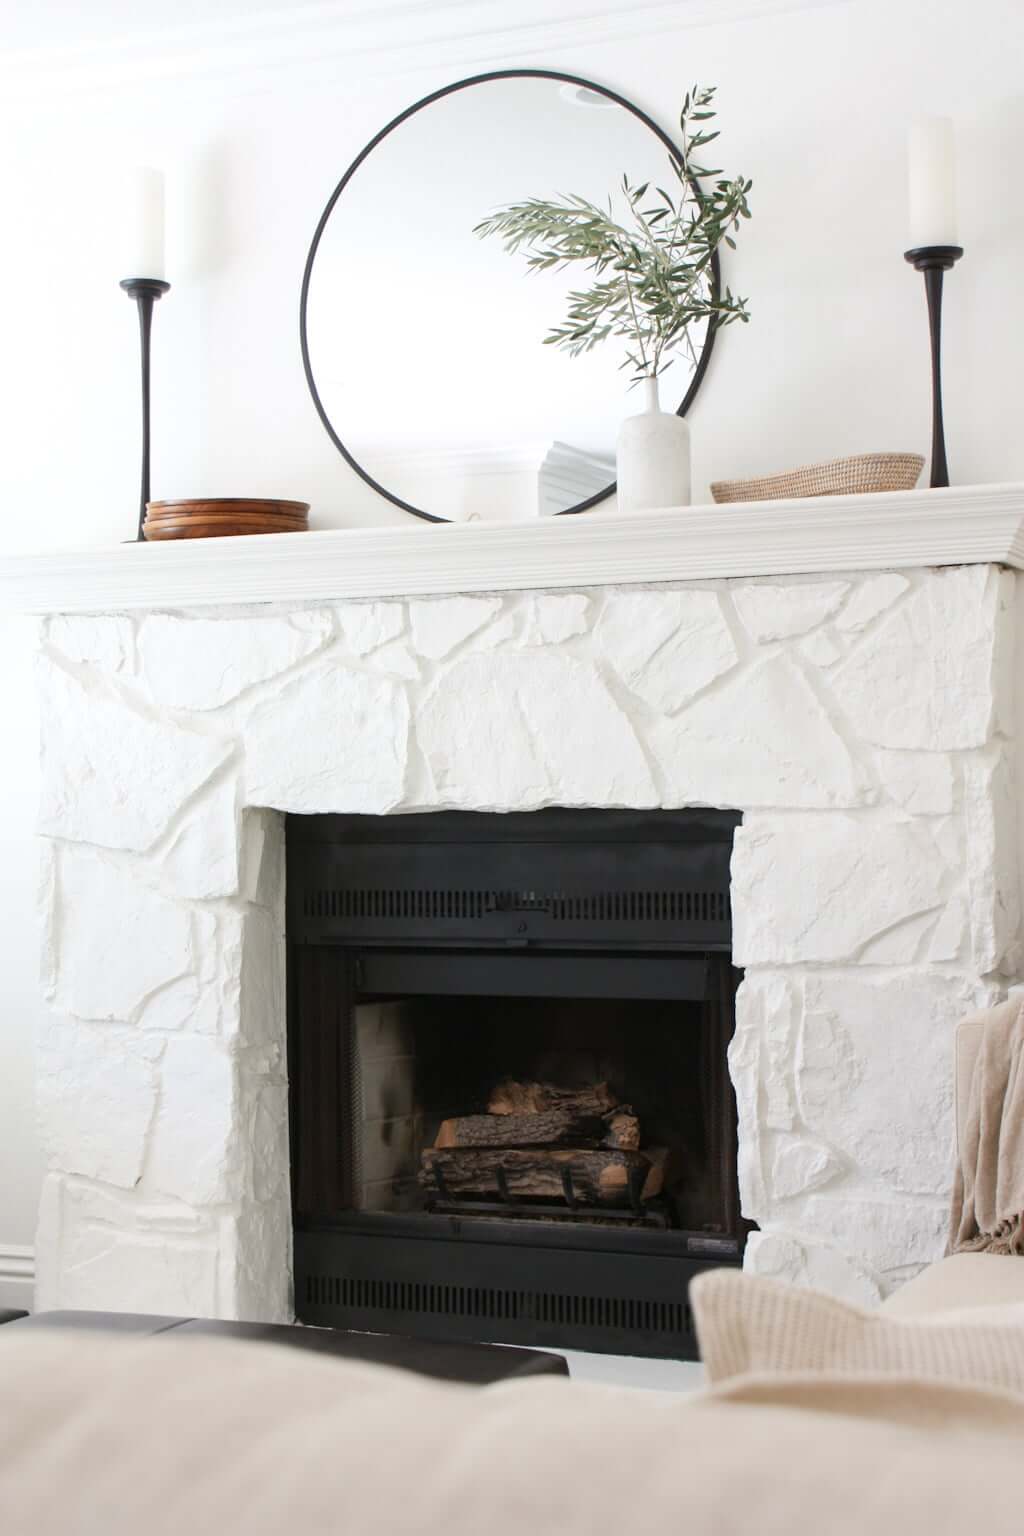 stone fireplace with mantel styled minimally, logs in fireplace